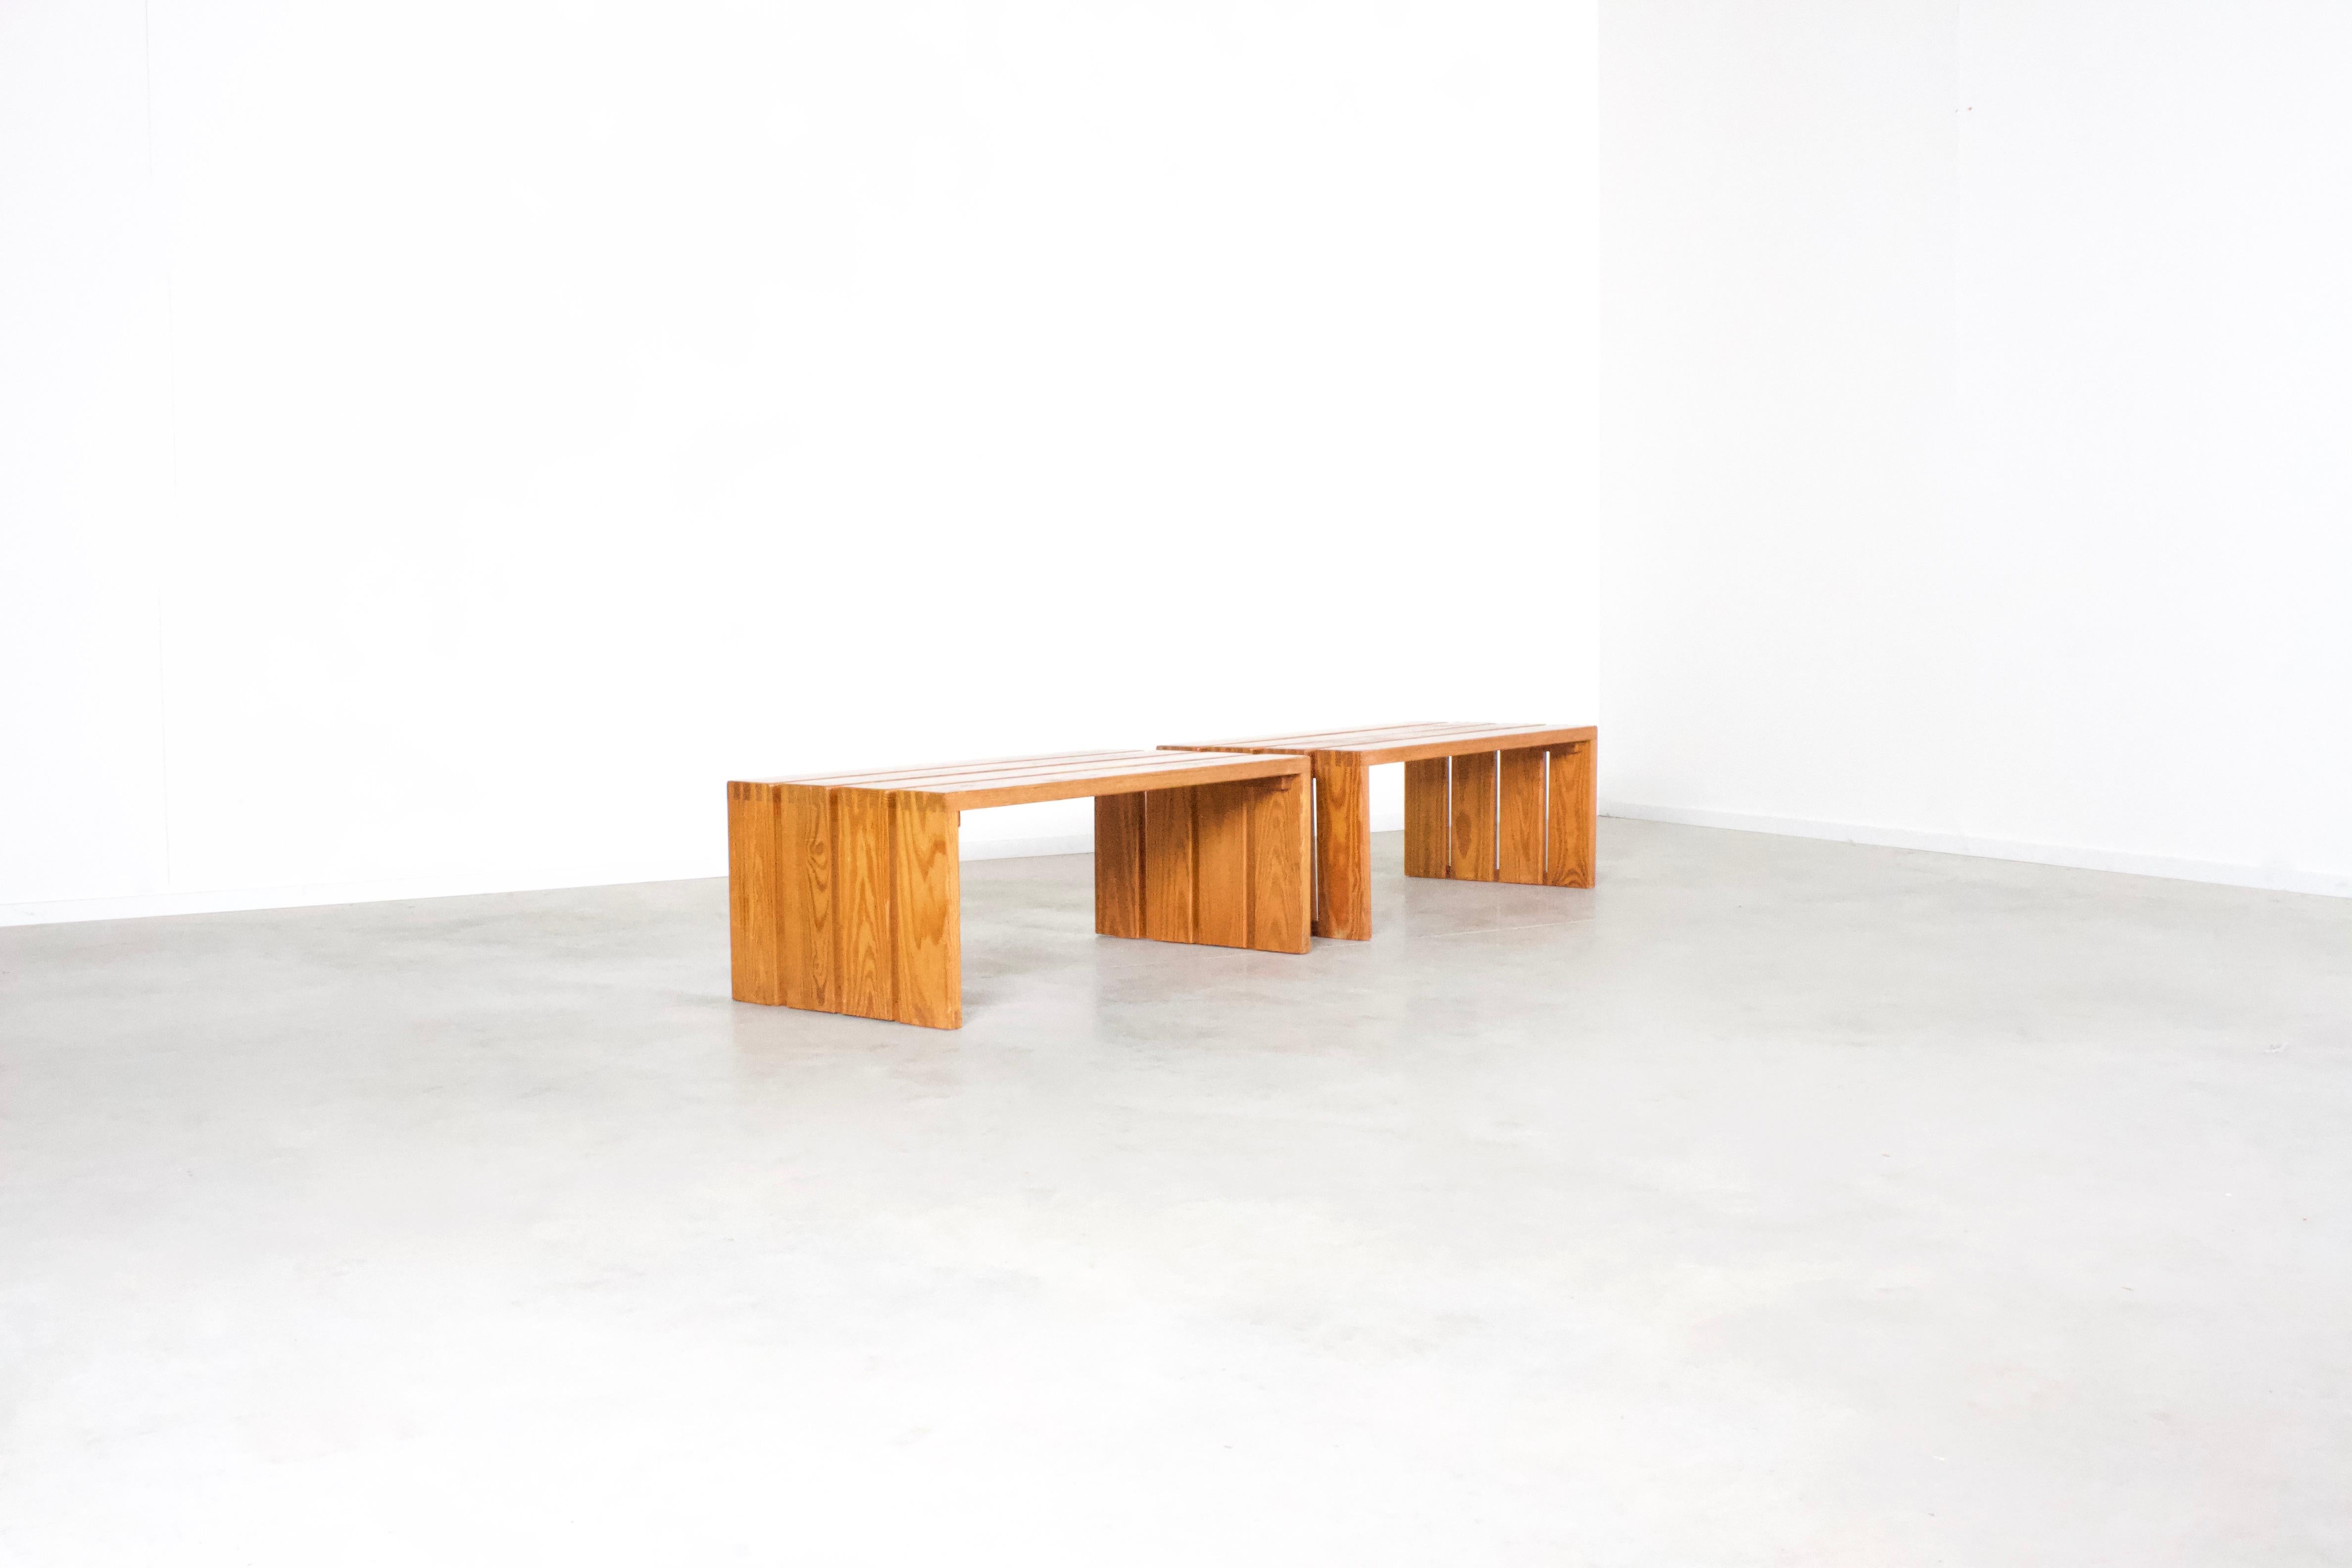 Set of French pine wood benches in very good condition.

Made of solid pine wood slats which are connected with typical joints.

The style reminds of Scandinavian modernism, like Swedish designer Sven Larsson or French designer Charlotte